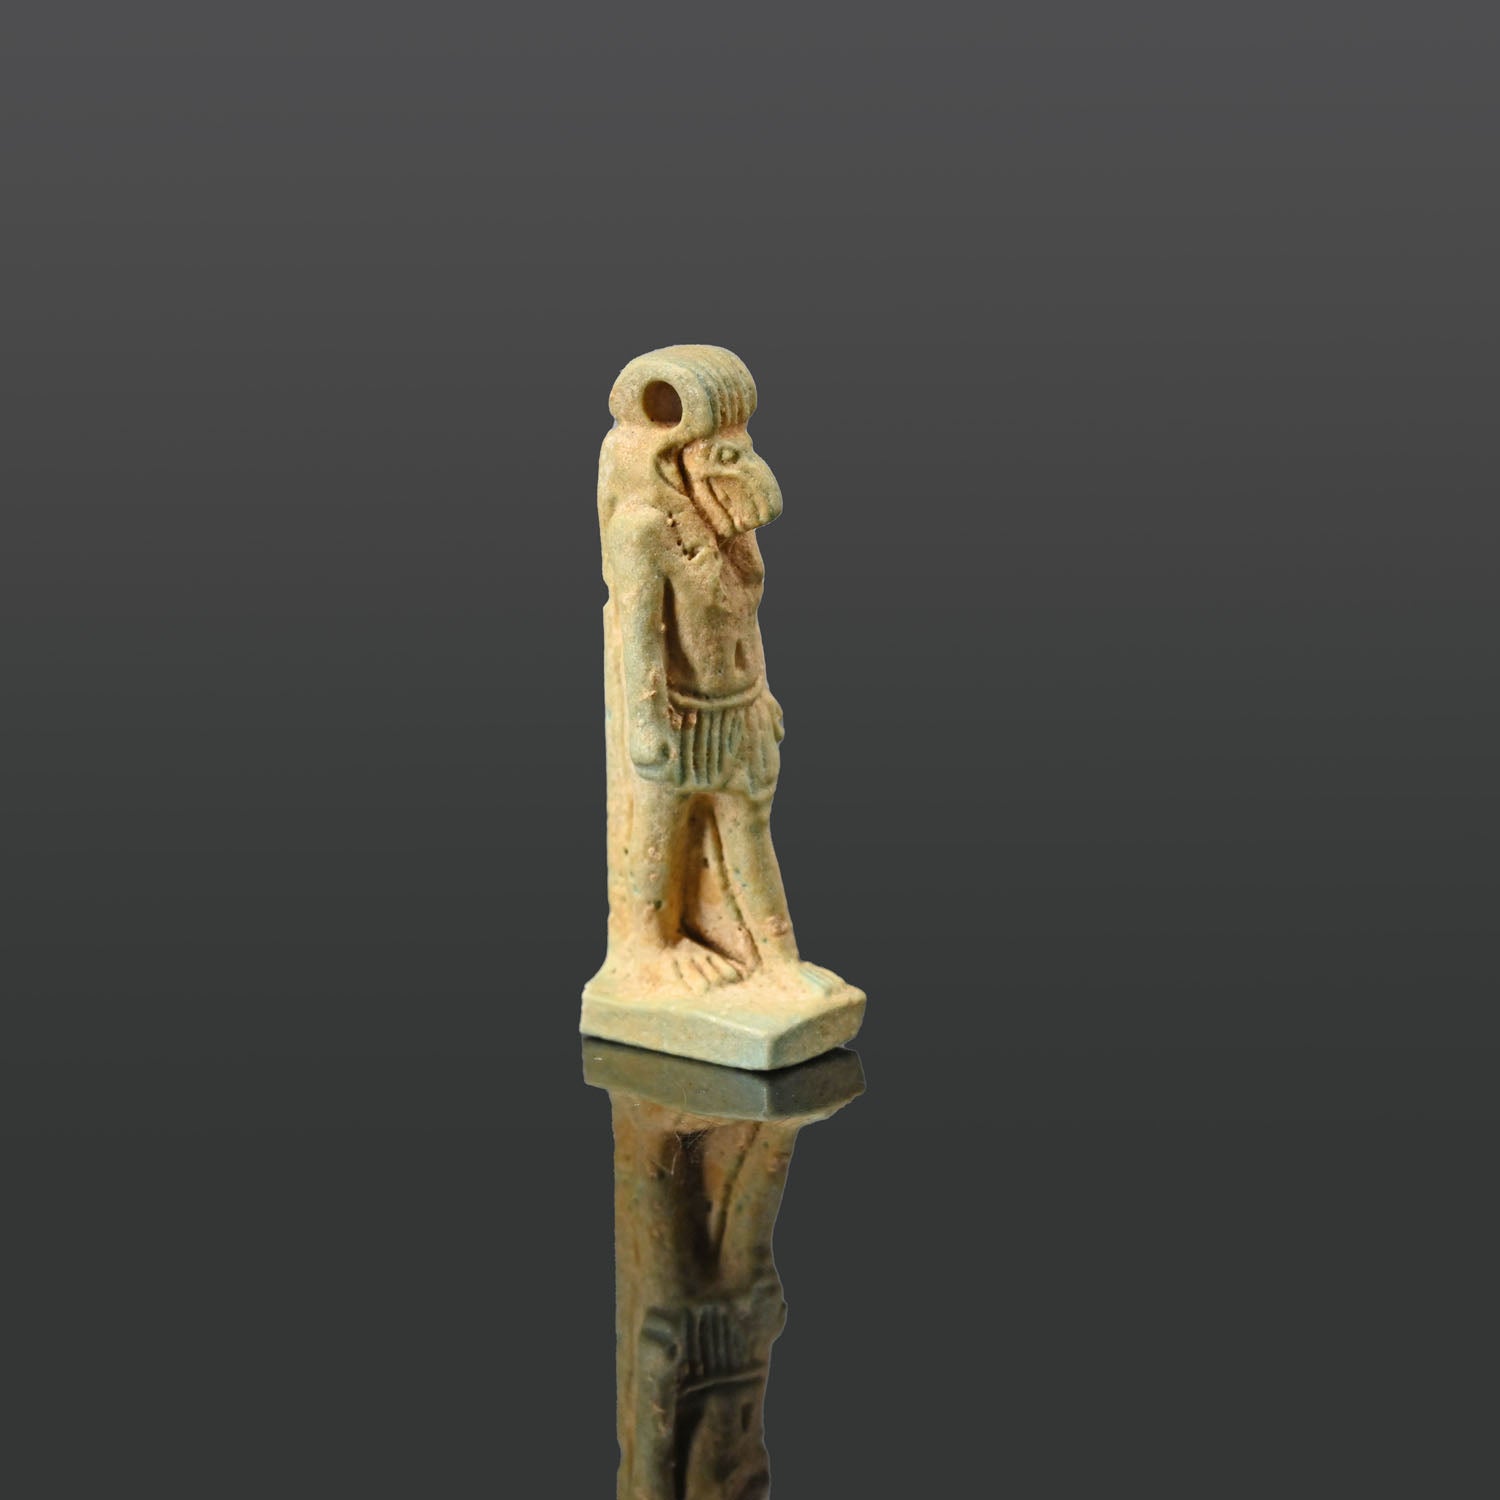 An Egyptian Faience Amulet of Thoth, Late Period, ca. 664 - 332 BCE